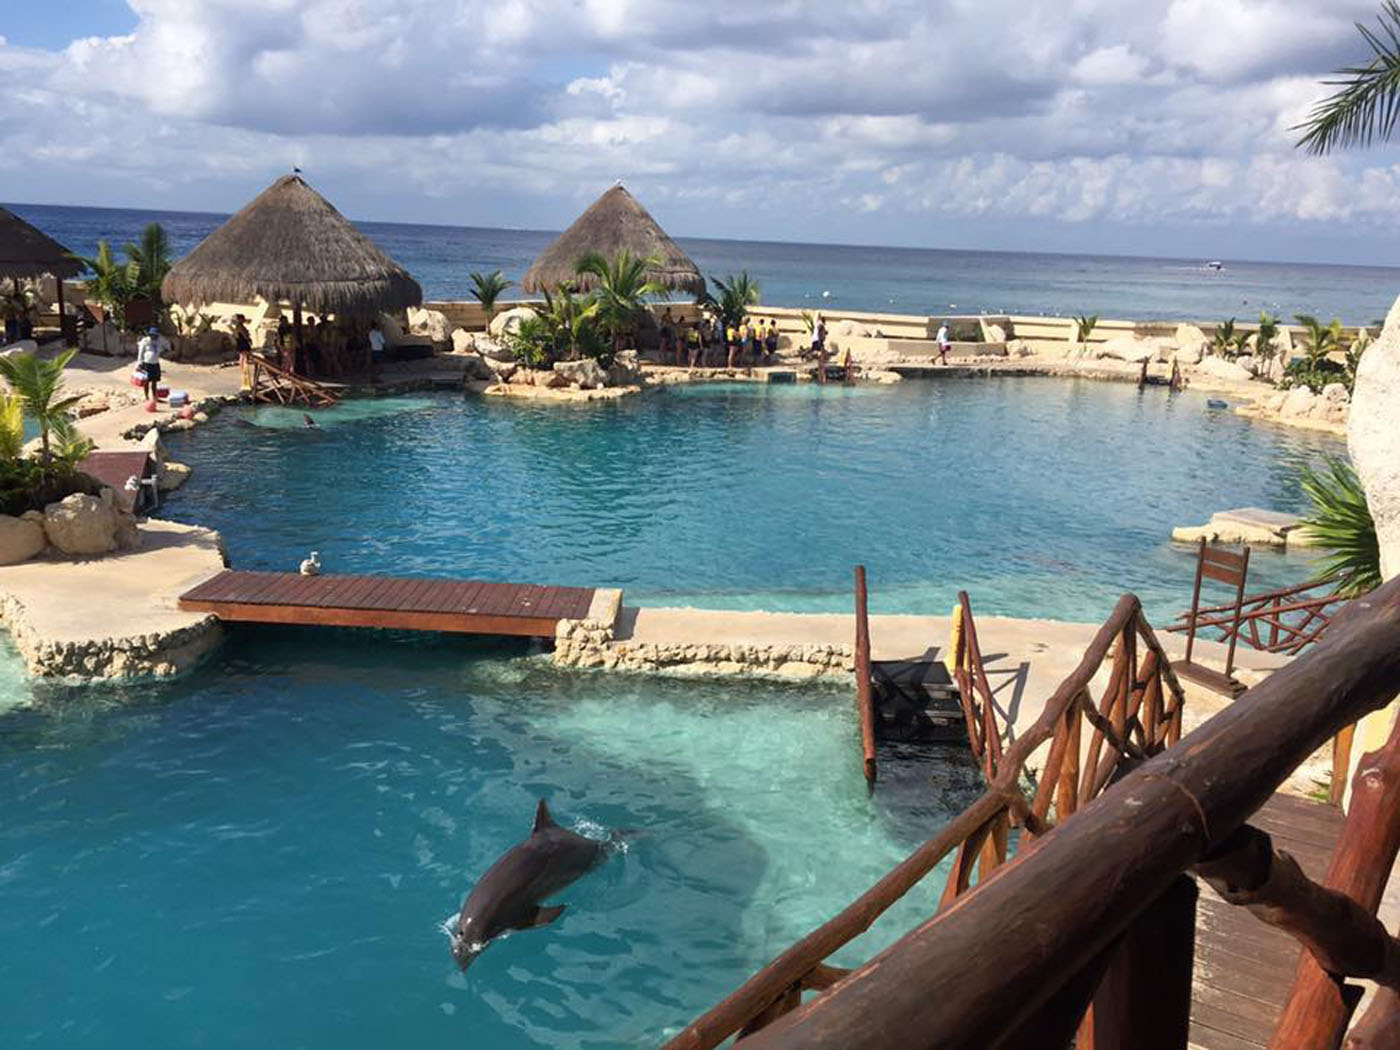 Learn more about the Port Adventures available in Cozumel, Mexico | PassPorter.com